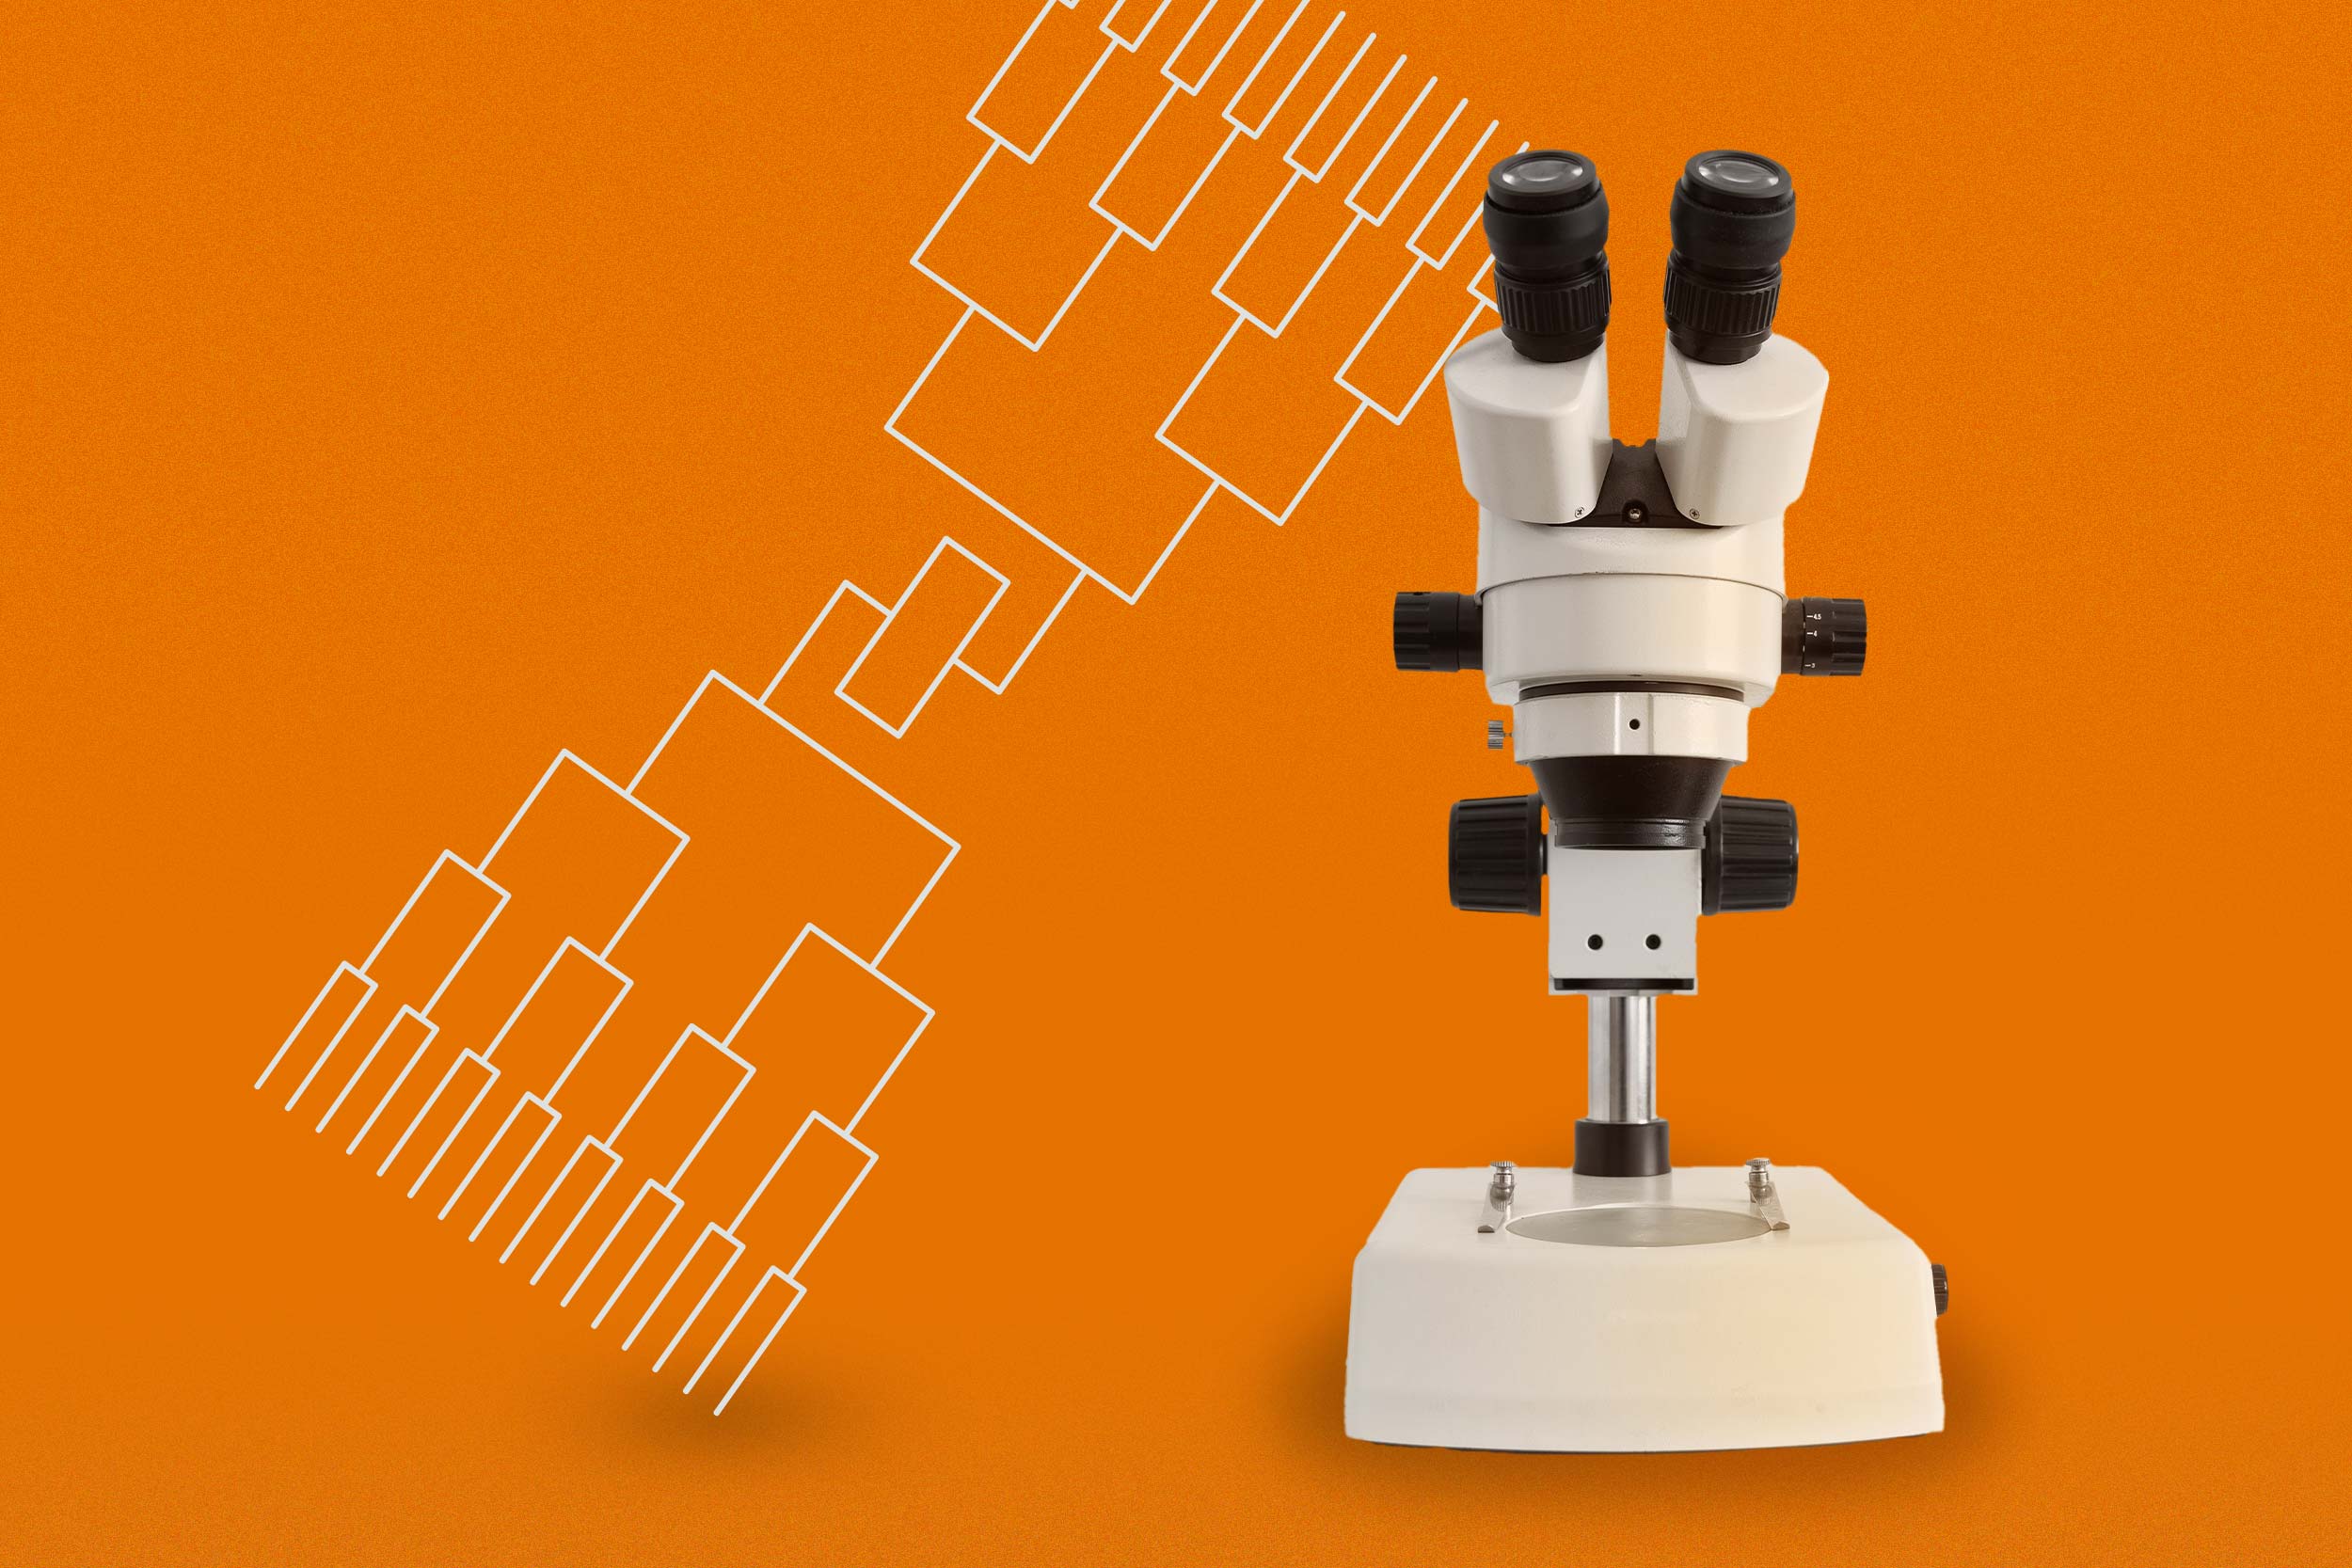 Illustration of a tournament bracket and a photo of a microscope